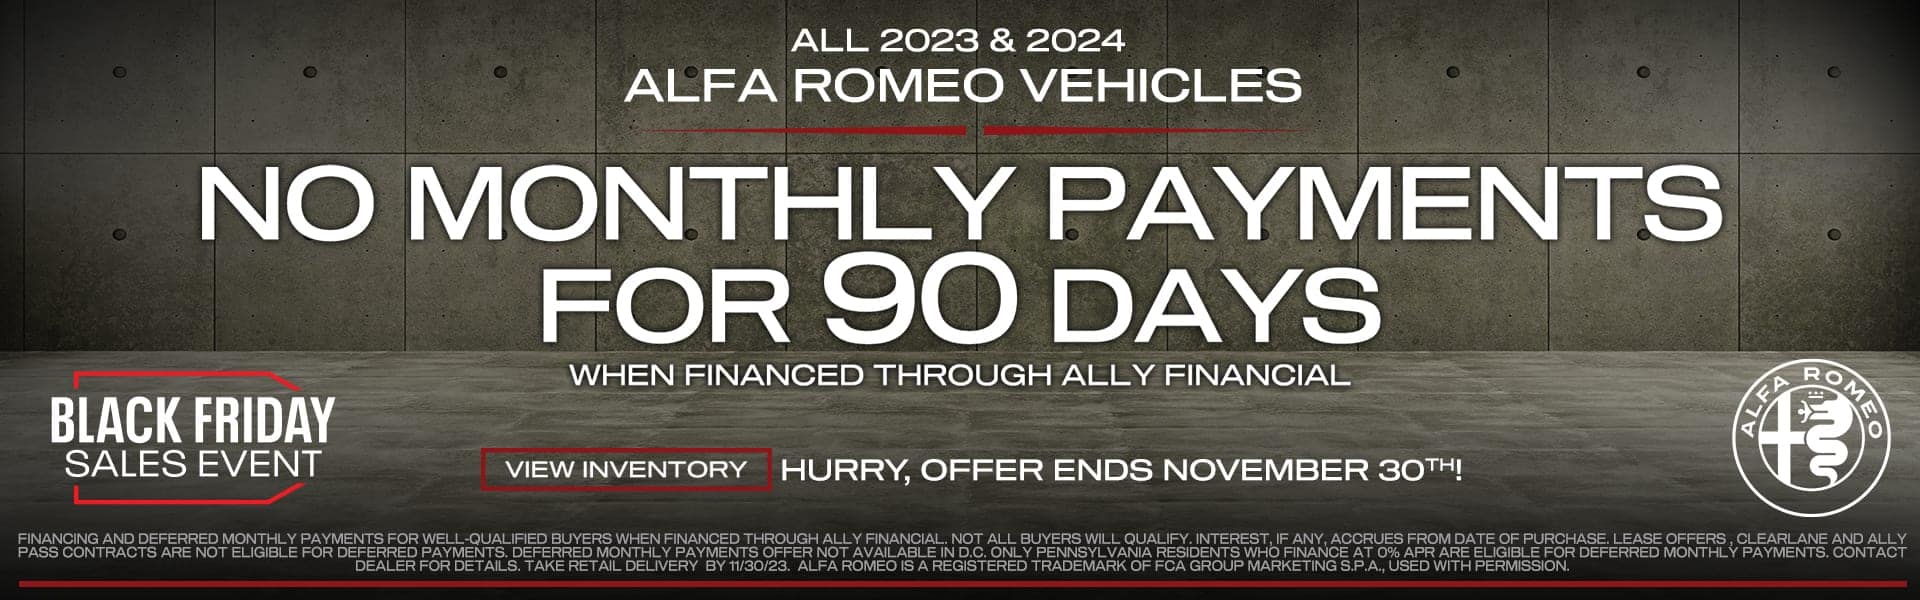 No Monthly Payments for 90 days on 2023 and 2024 Alfa Romeo Vehicles